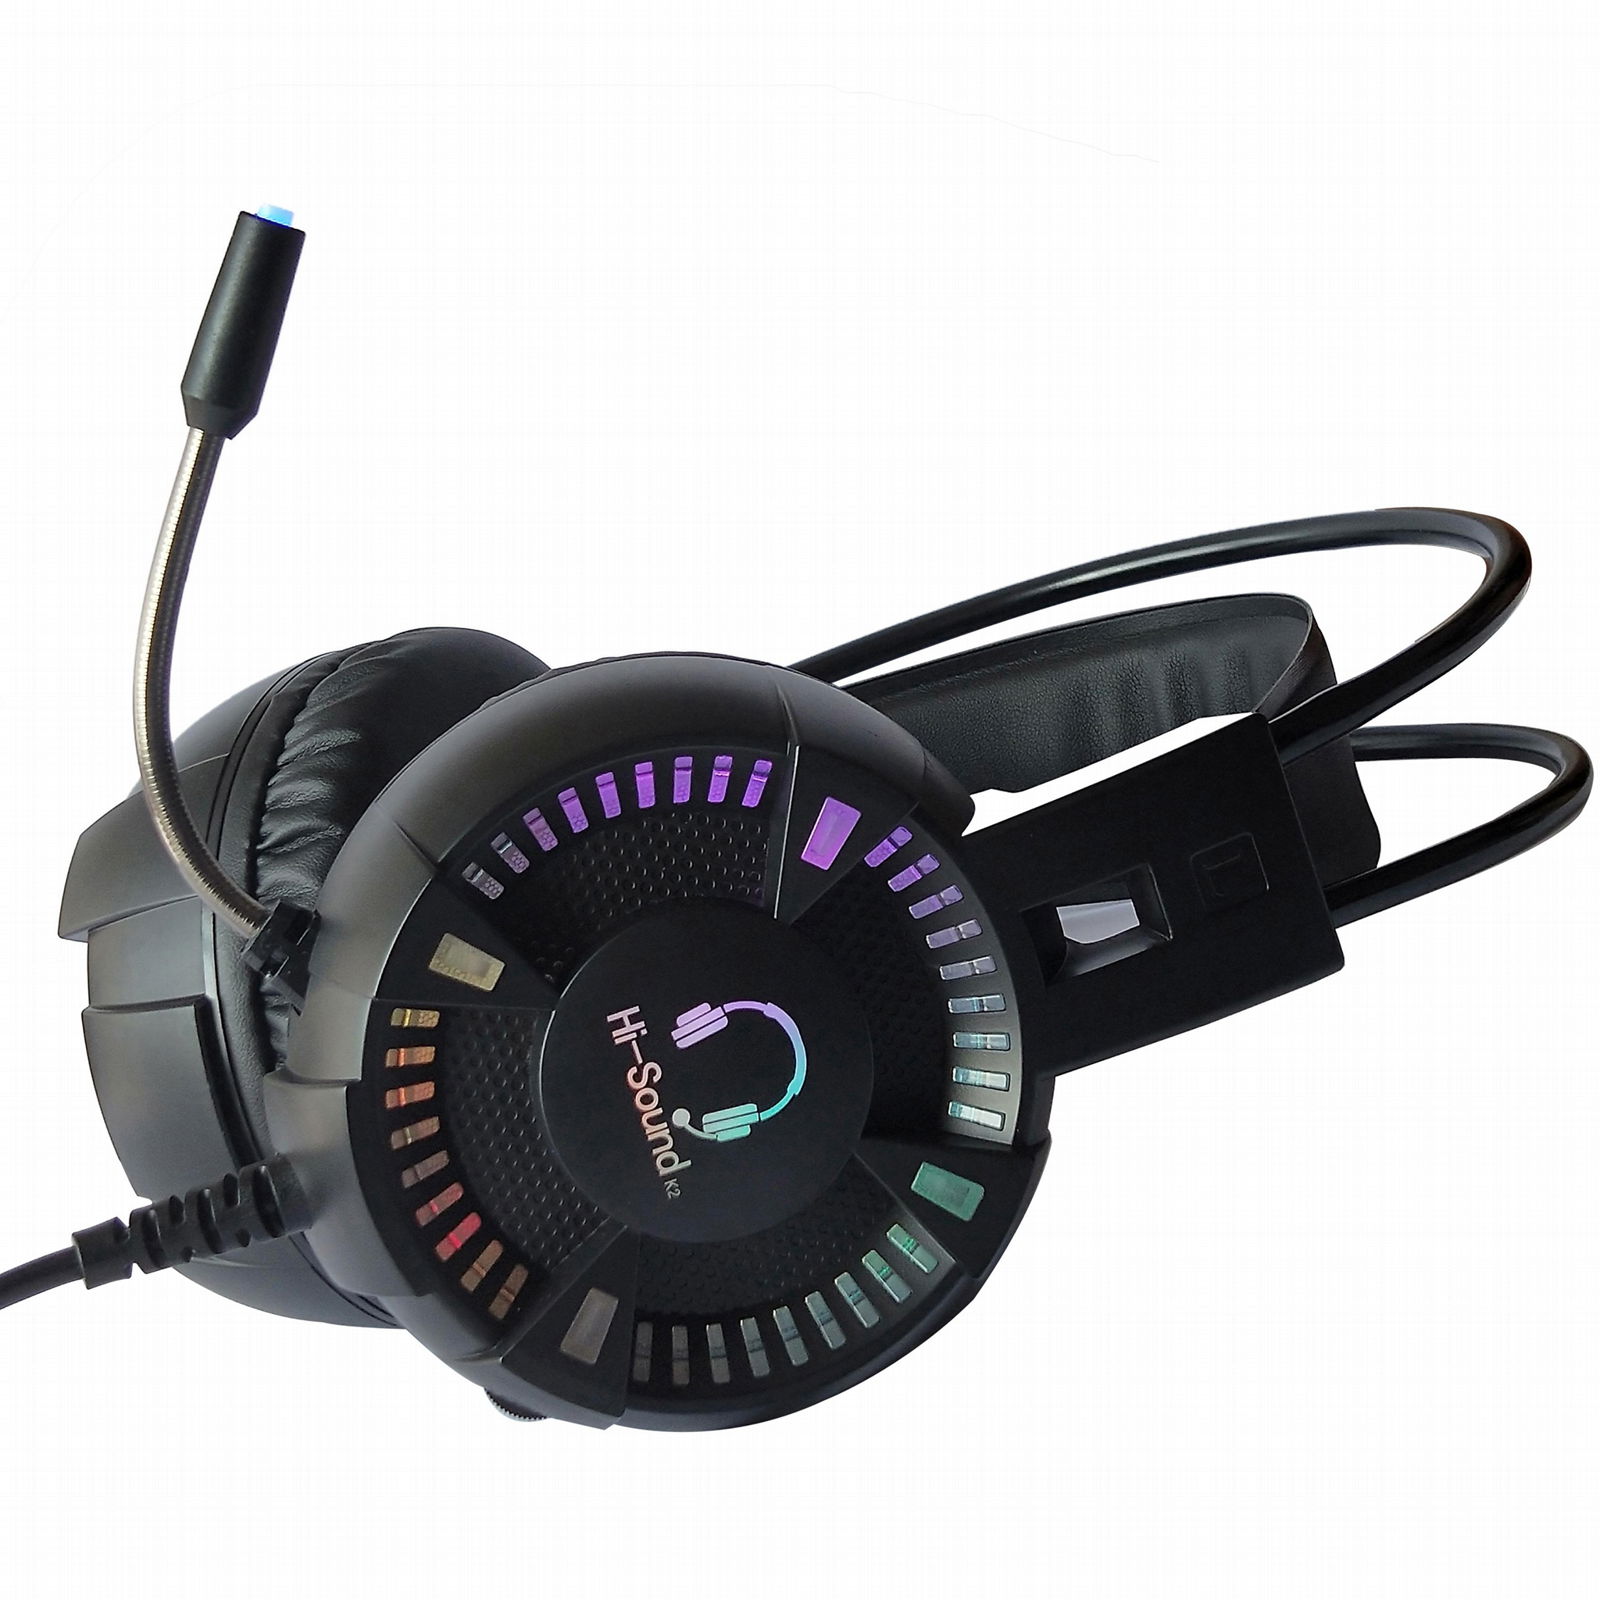 Hi-sound LED Cool Colorful LED Gaming Headset for gamers 5